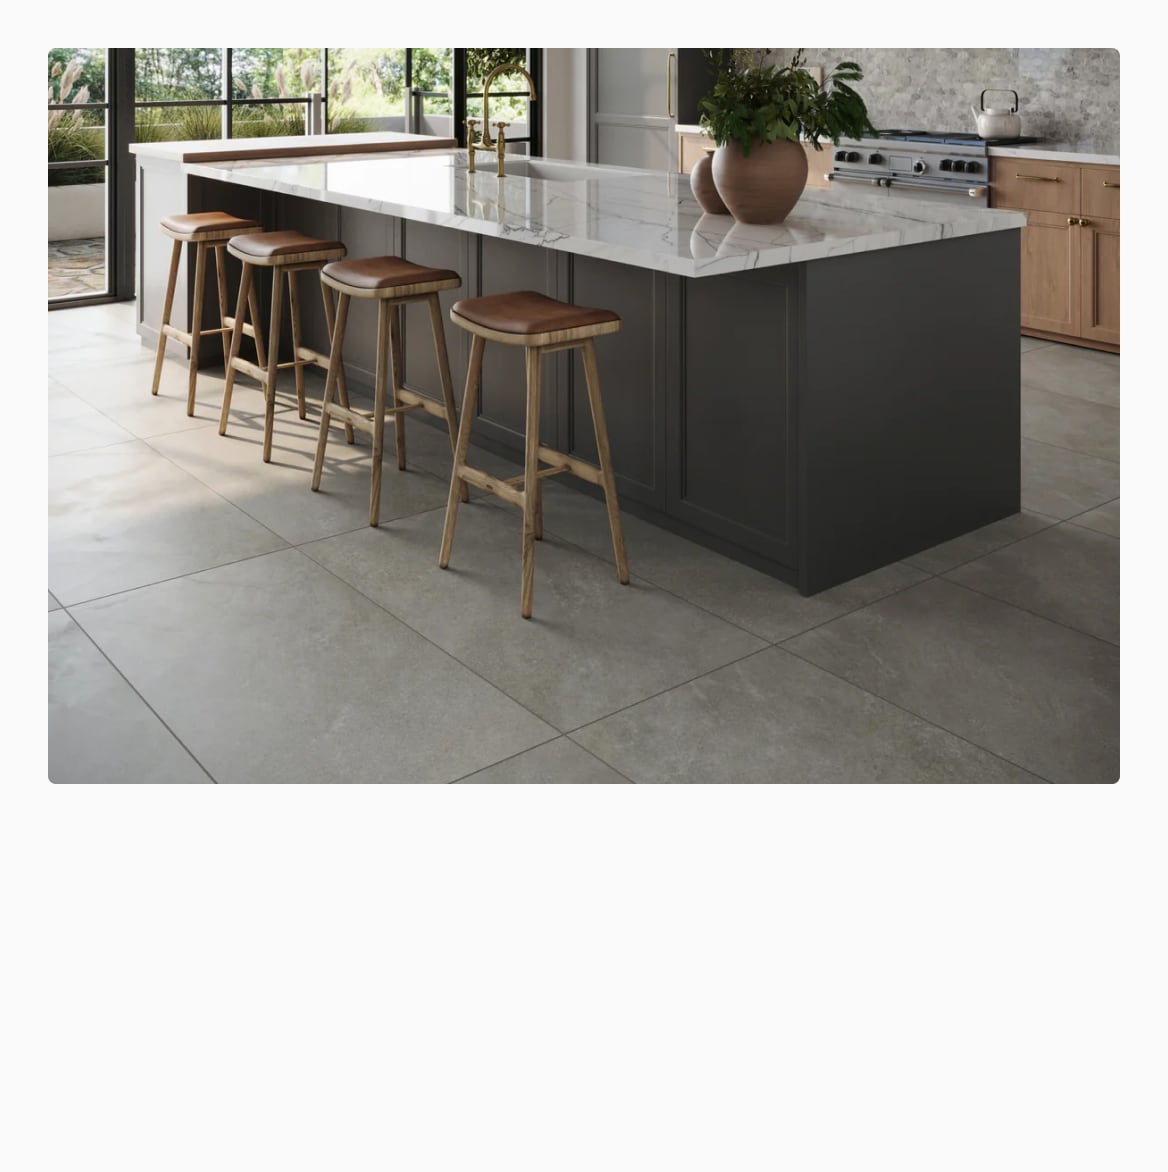 Chic kitchen space showcasing large 24x48 Tiles, with a sleek Travertine look, enhancing the room's modern appeal.